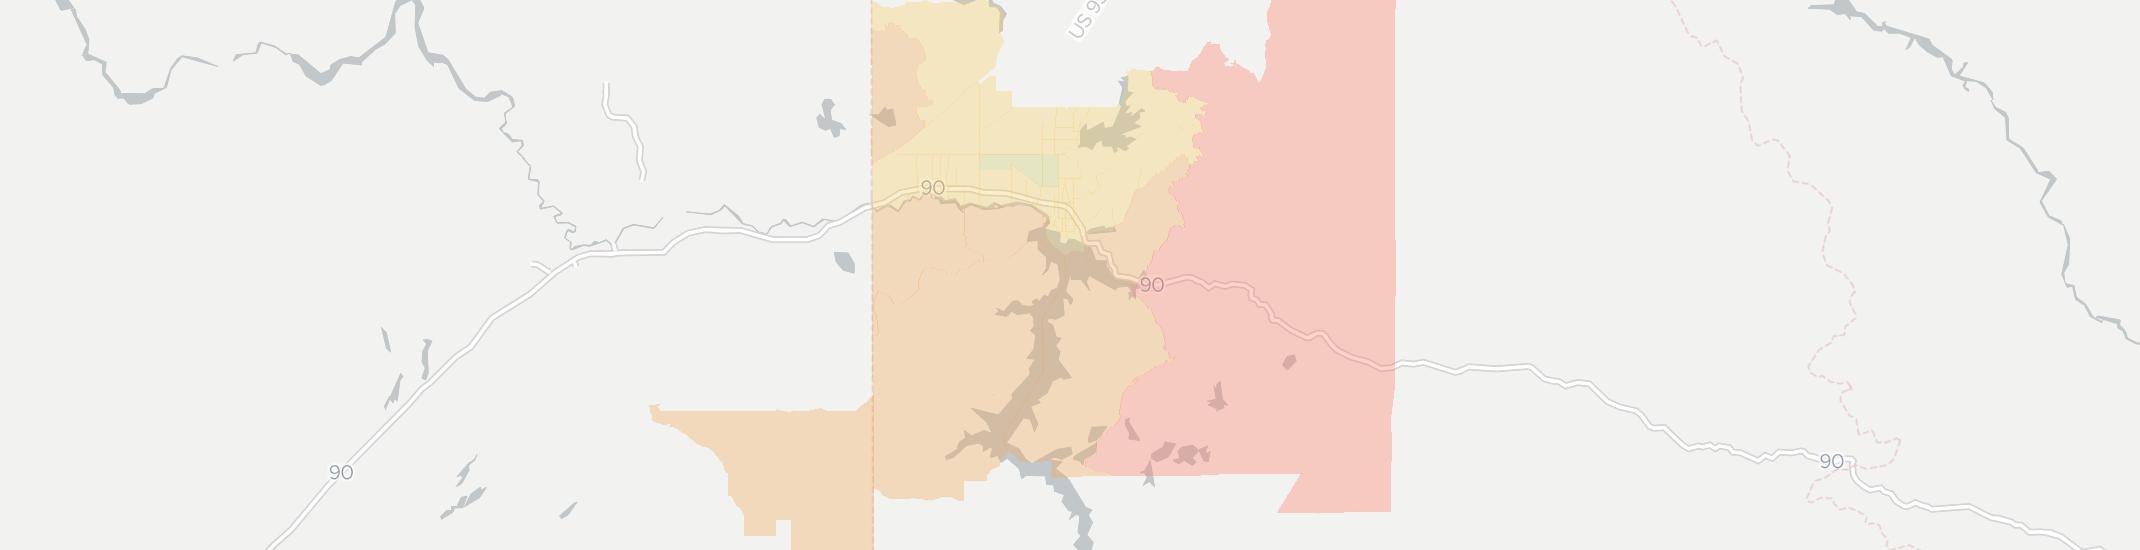 Coeur d’Alene Internet Competition Map. Click for interactive map